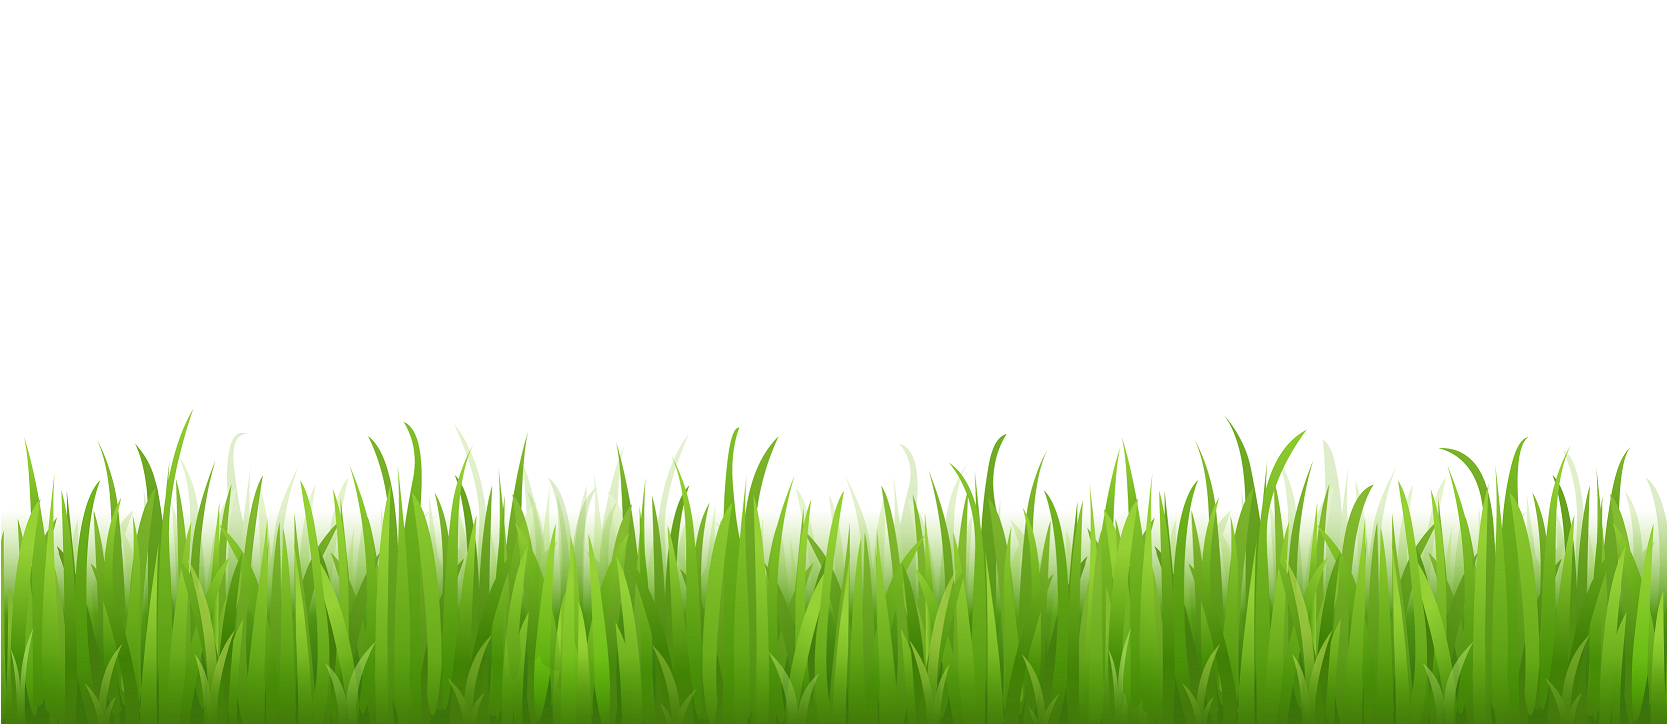 Green Grass PNG Image Background